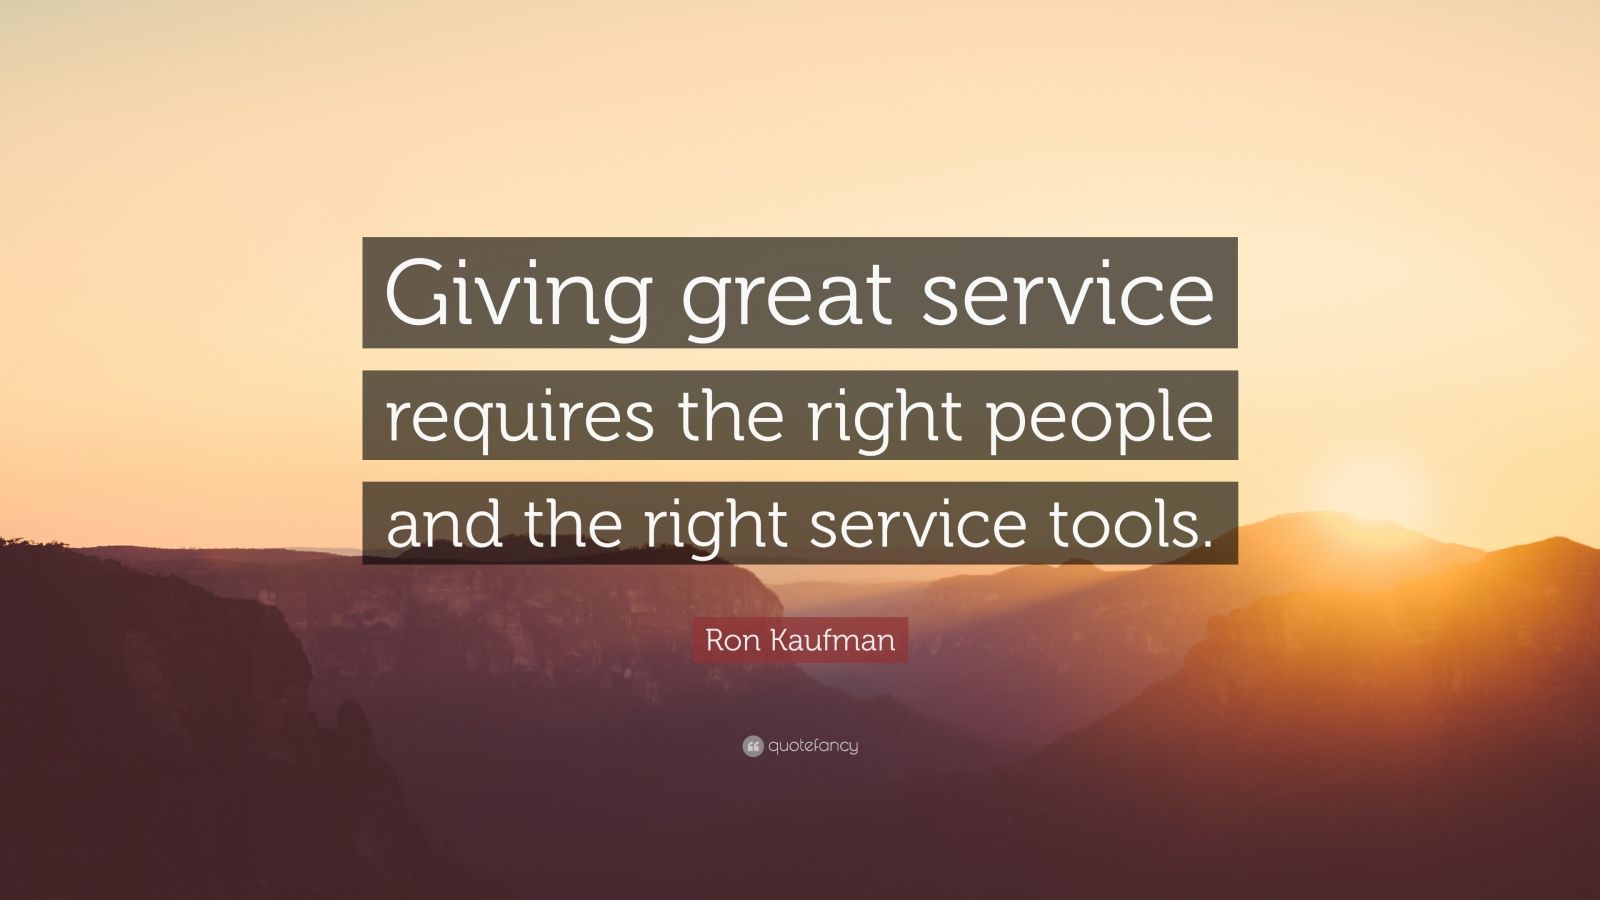 Ron Kaufman Quote: “Giving great service requires the right people and